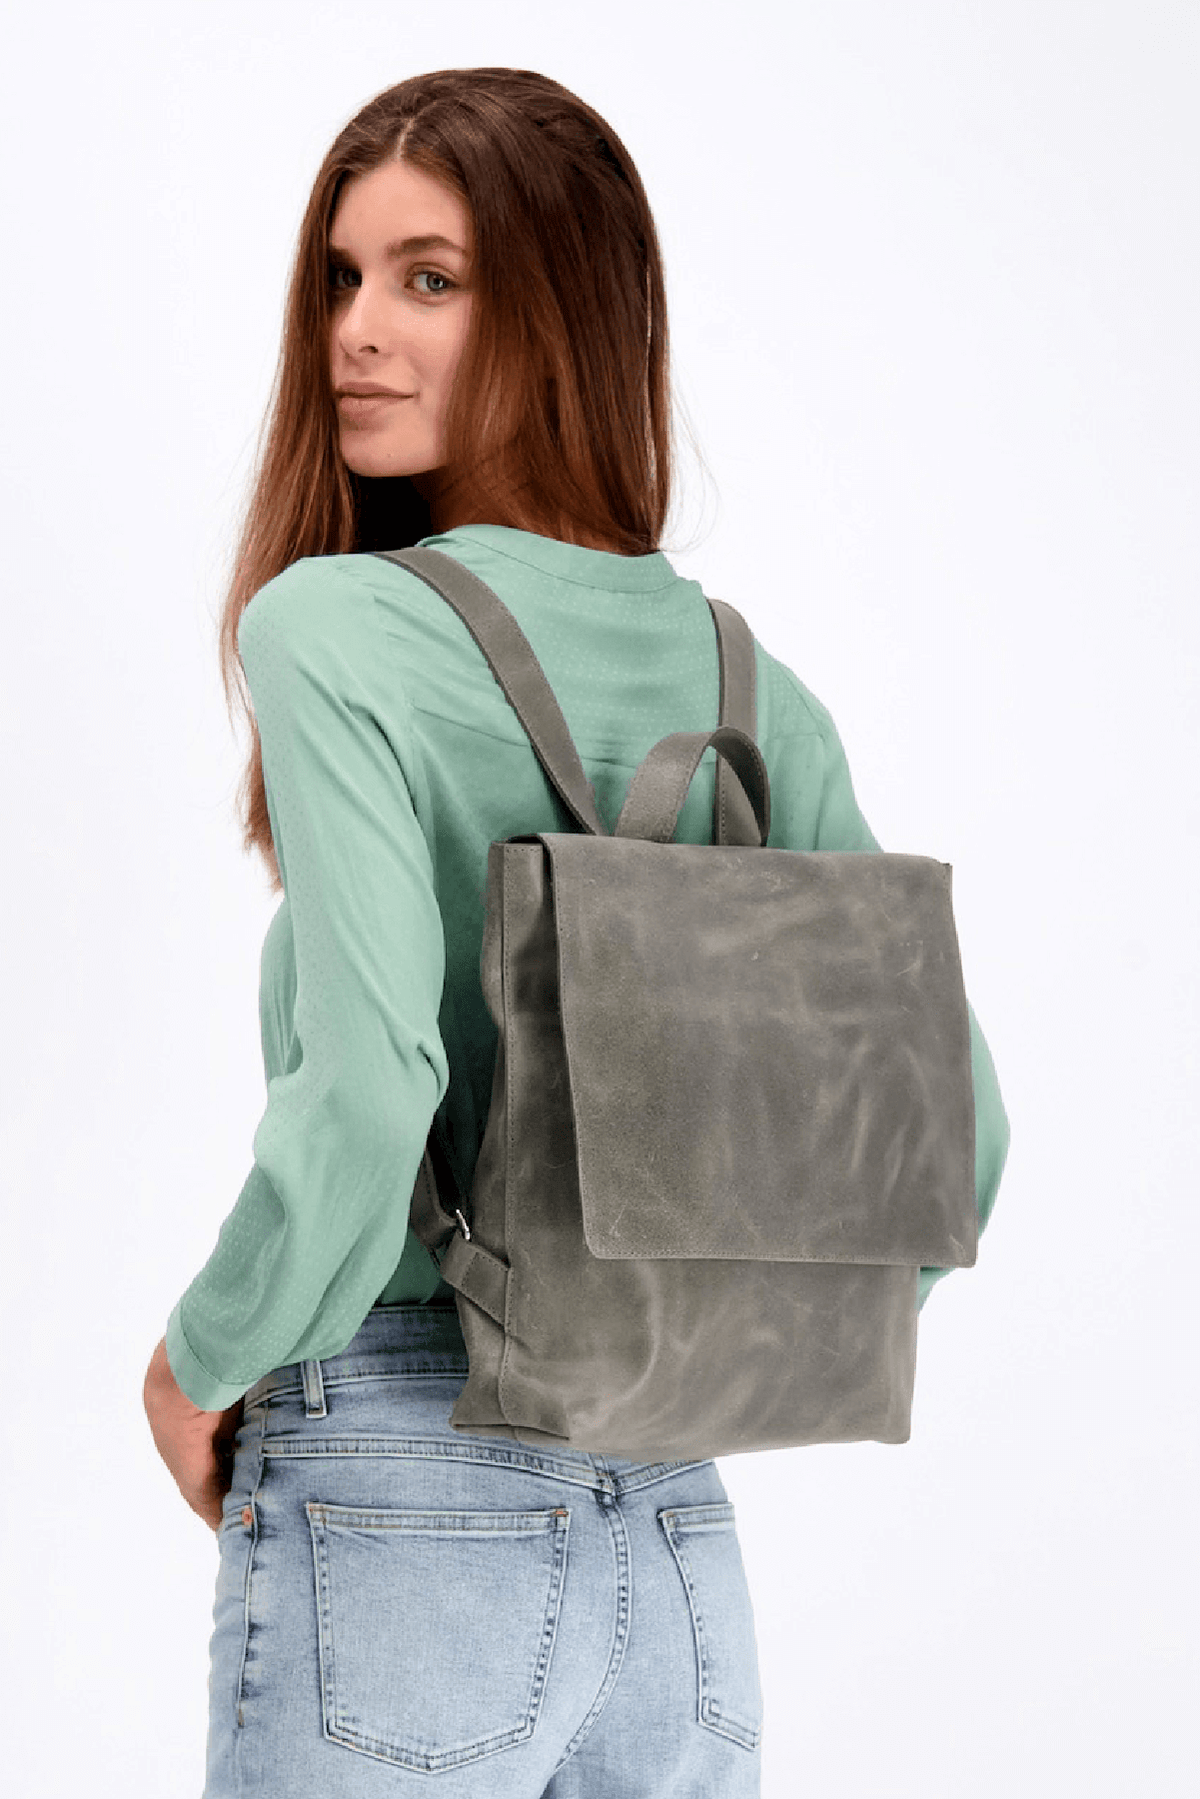 LXYGD Backpack Purse for Women, Soft PU Leather Anti Theft India | Ubuy